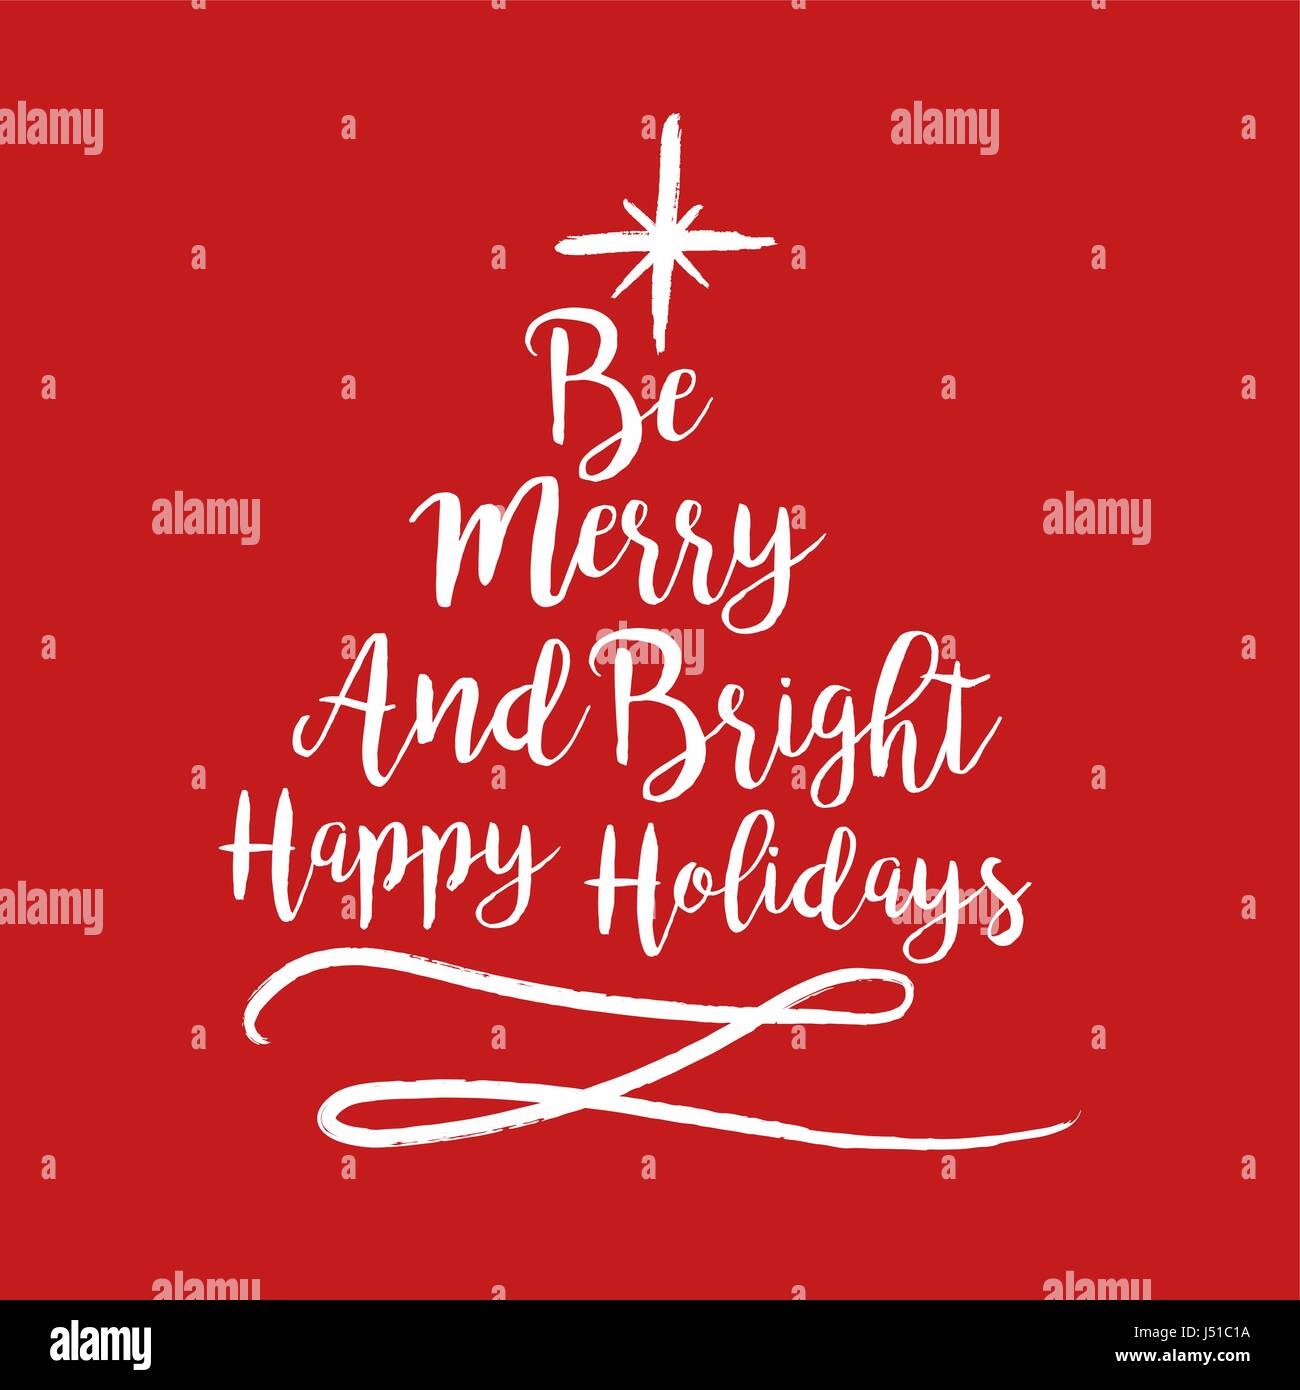 Merry Christmas calligraphy quote, lettering text design for holiday season. Creative red typography font illustration. EPS10 vector. Stock Vector